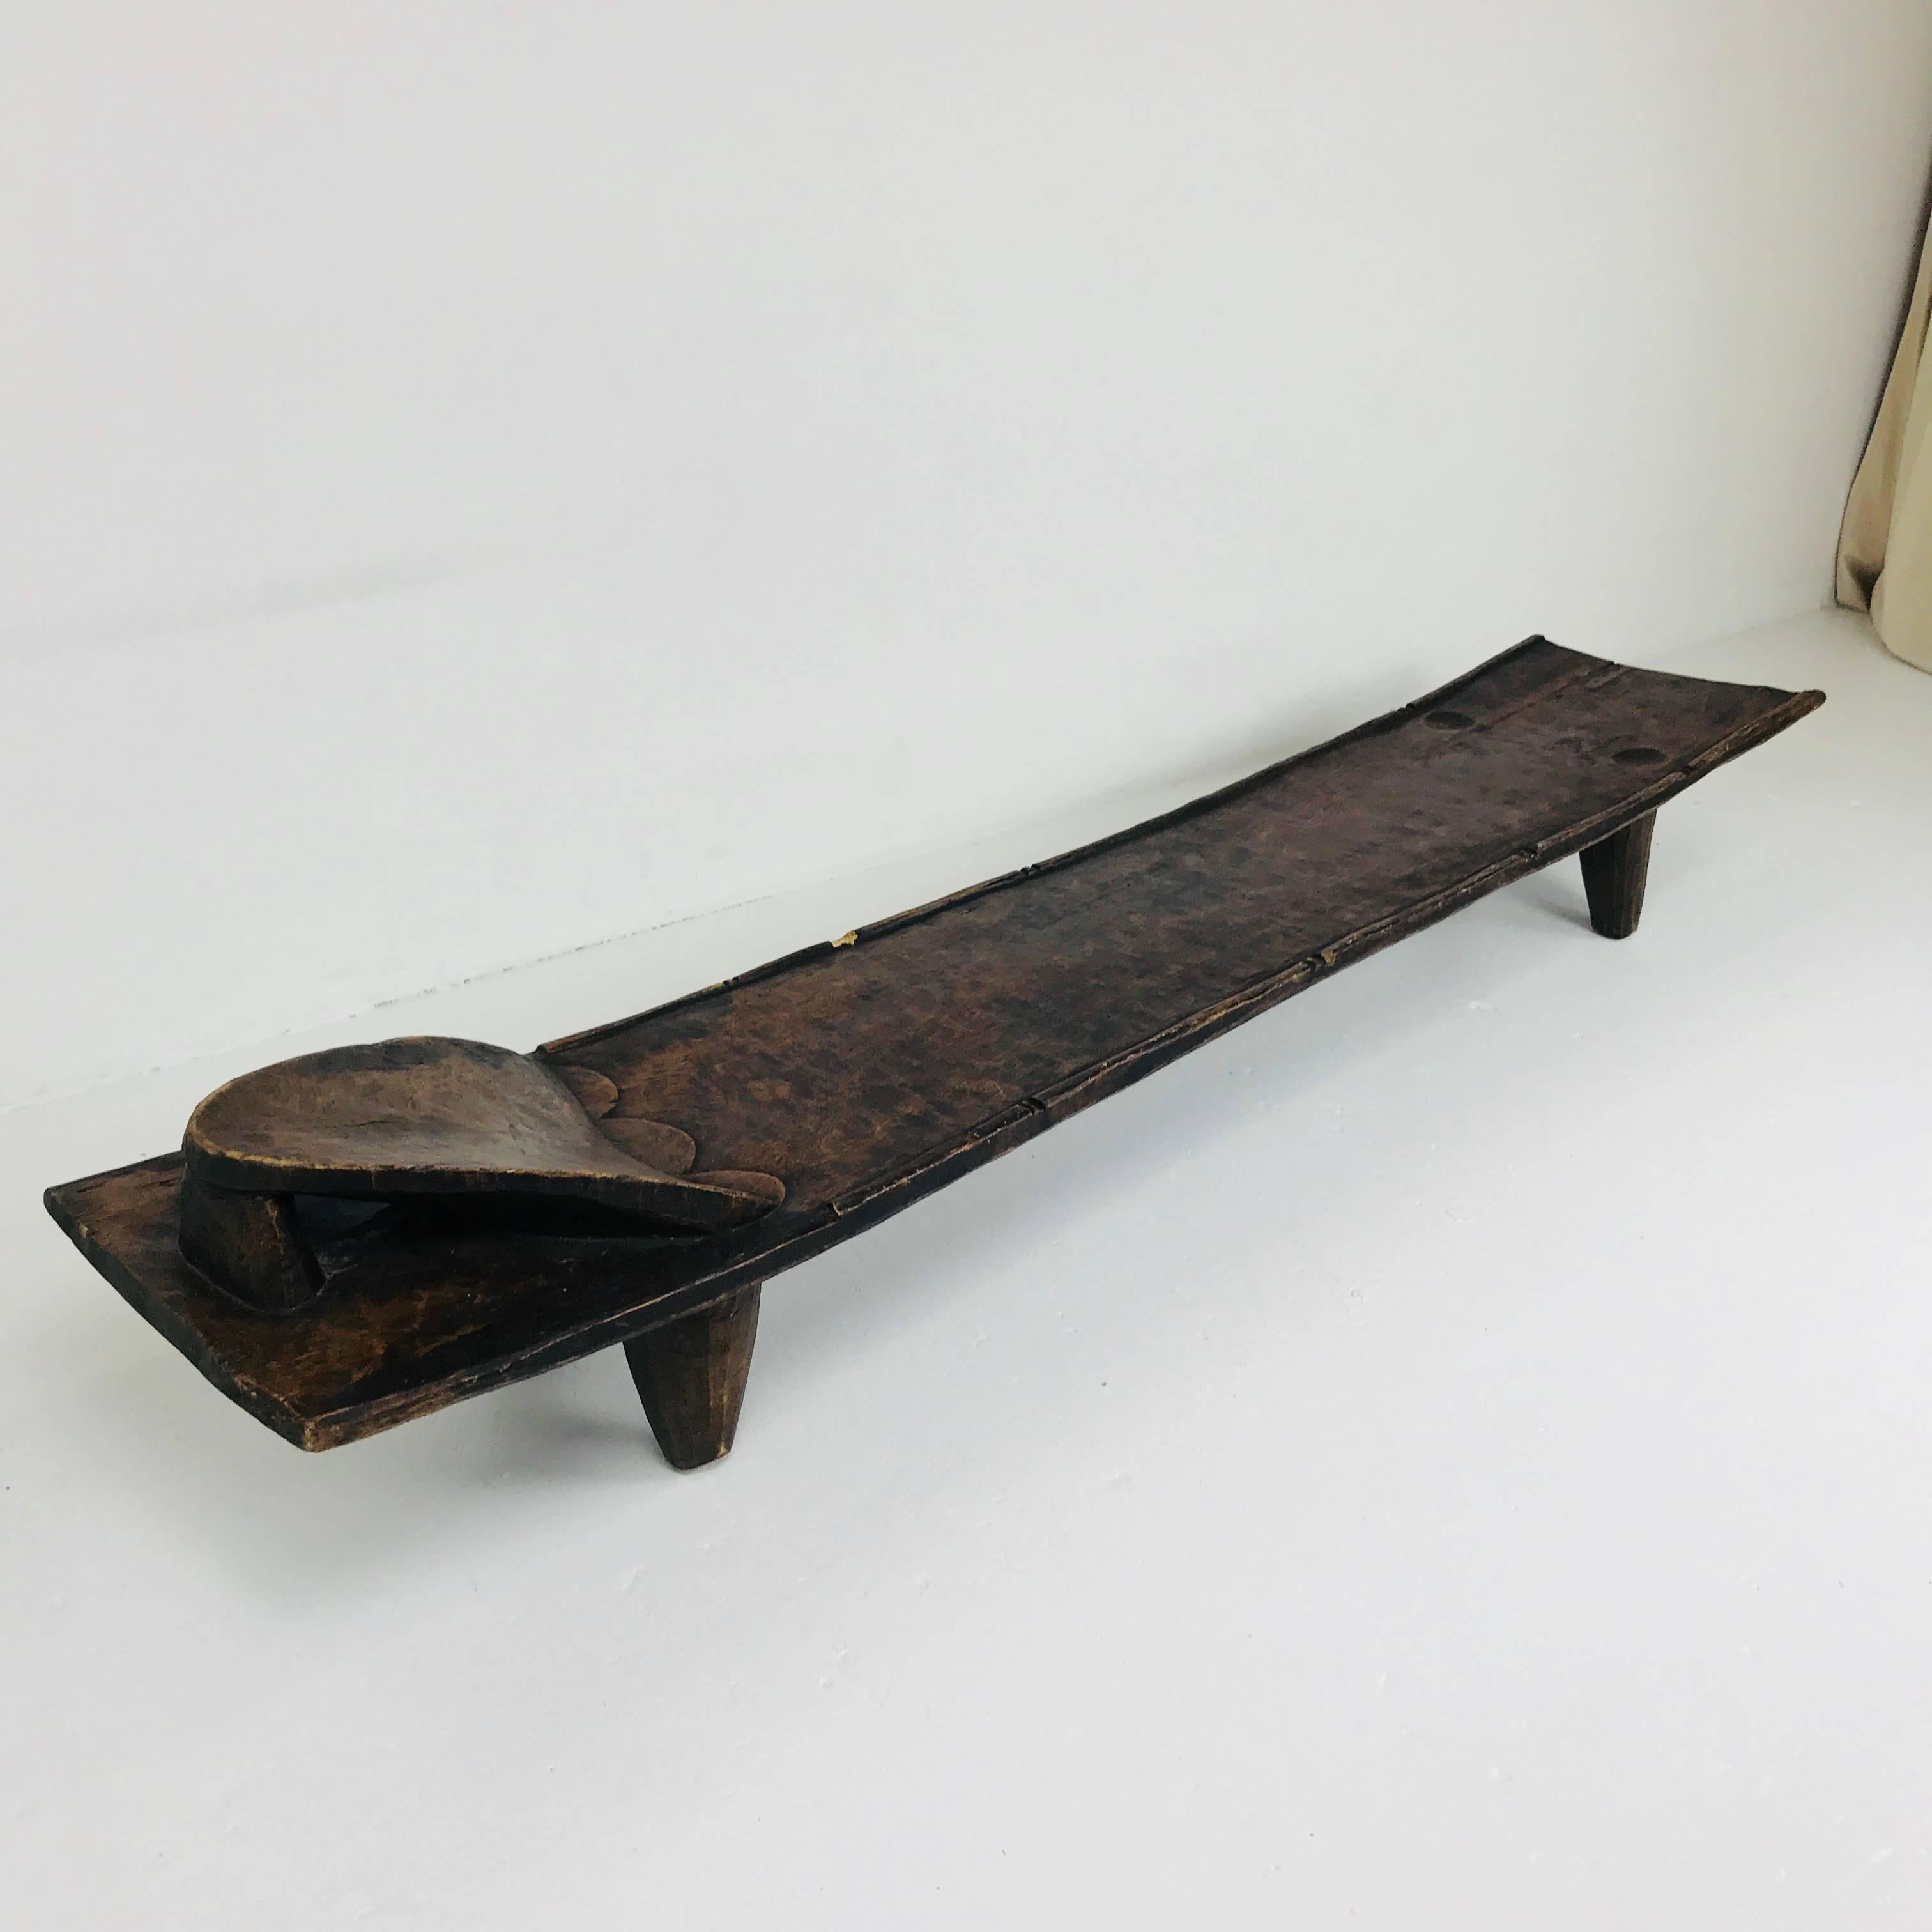 West African craved wood bed/bench by the Senufo Tribe. Craved from a solid piece of wood with minor loss but in overall good vintage condition.

Dimensions: 94